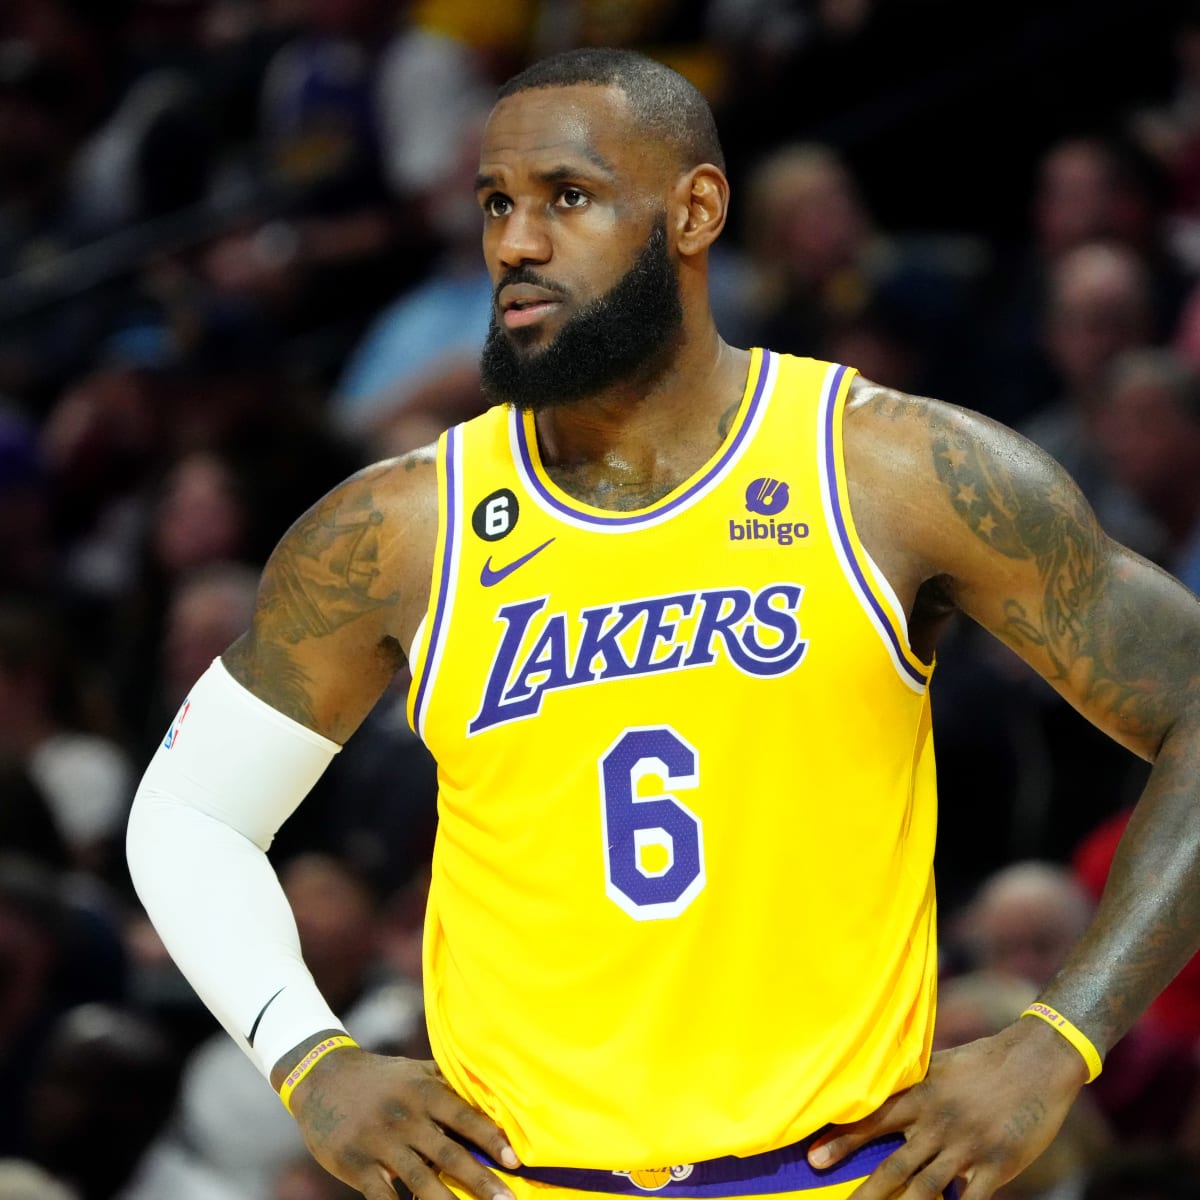 Lakers' LeBron James Talks Significance of Wearing No. 6 After